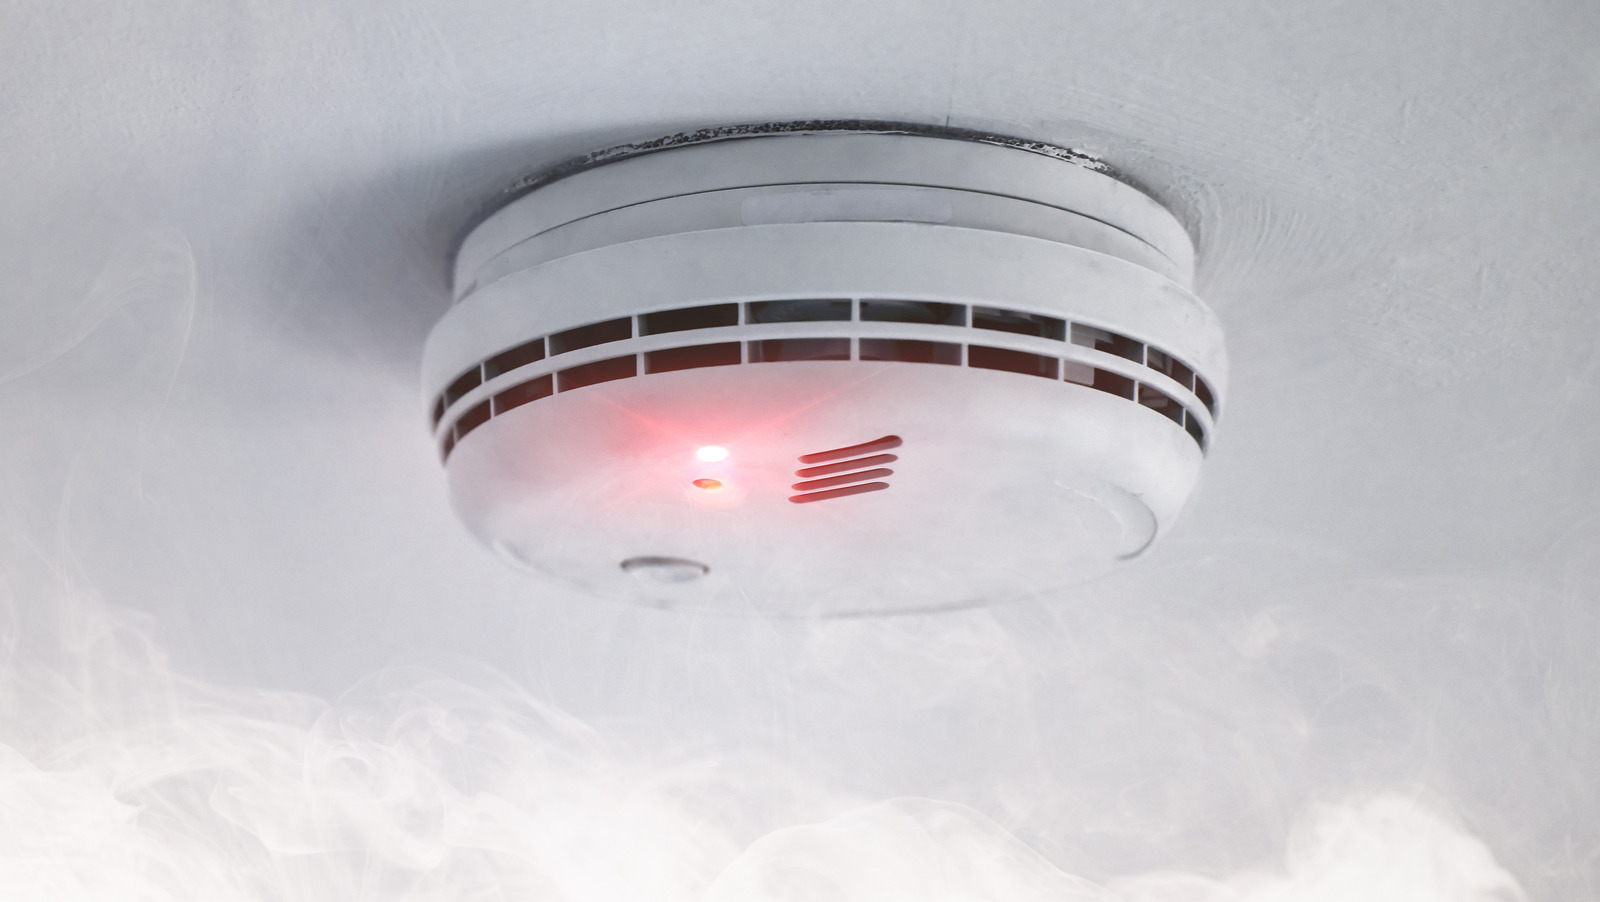 Why Does A Smoke Detector Beep?